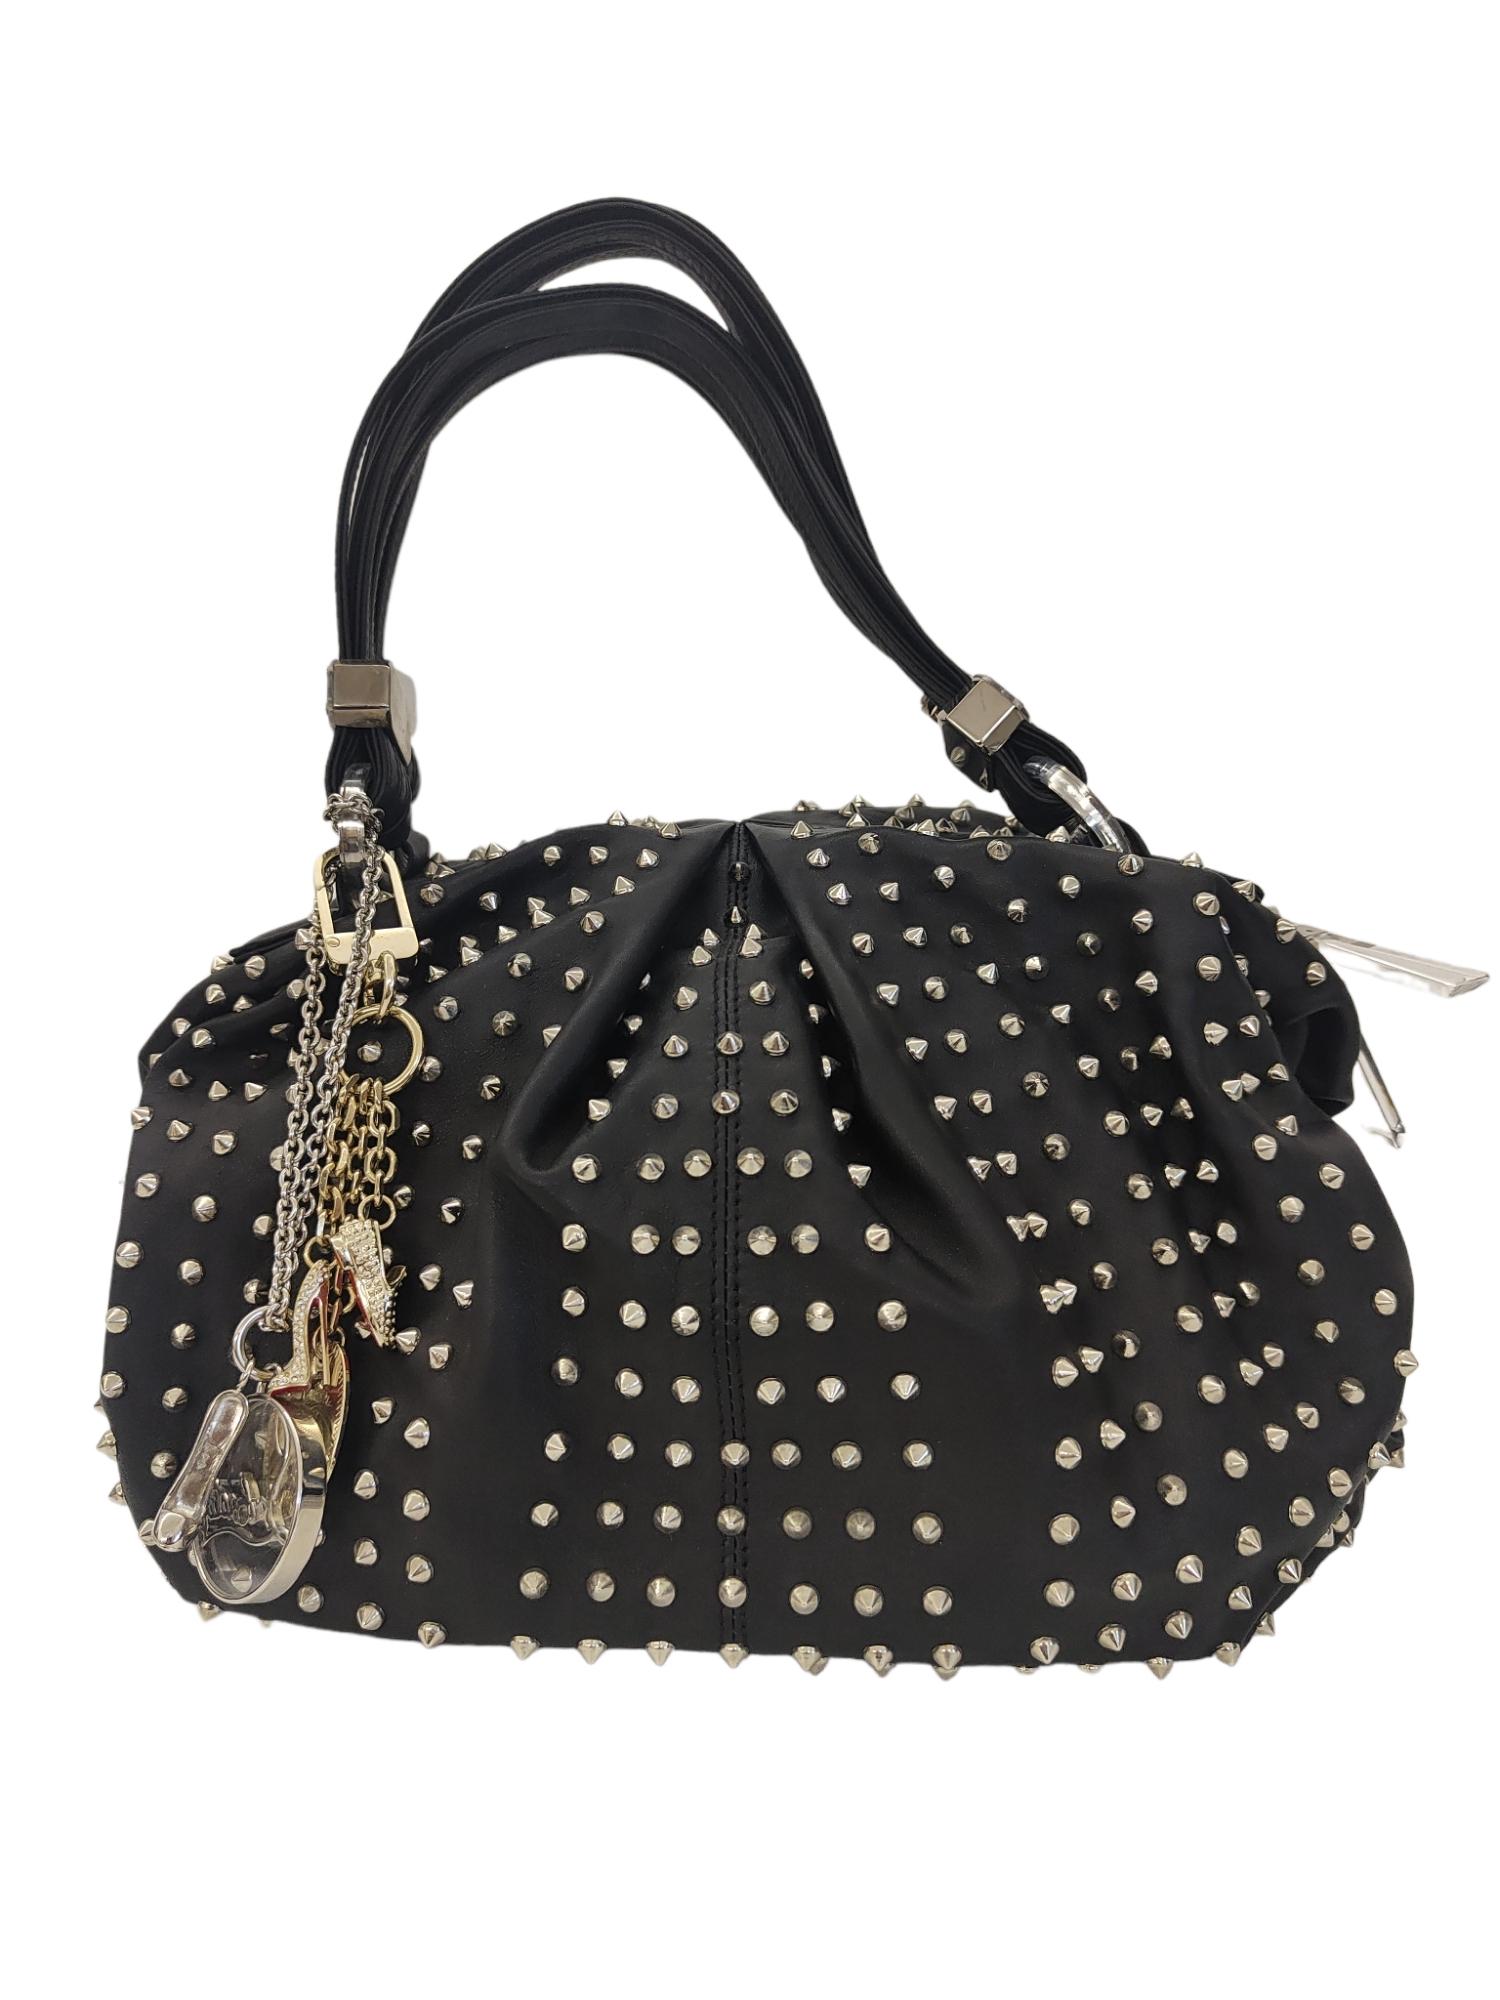 Christian Loboutin black leather silver studs handle bag In Excellent Condition For Sale In Capri, IT